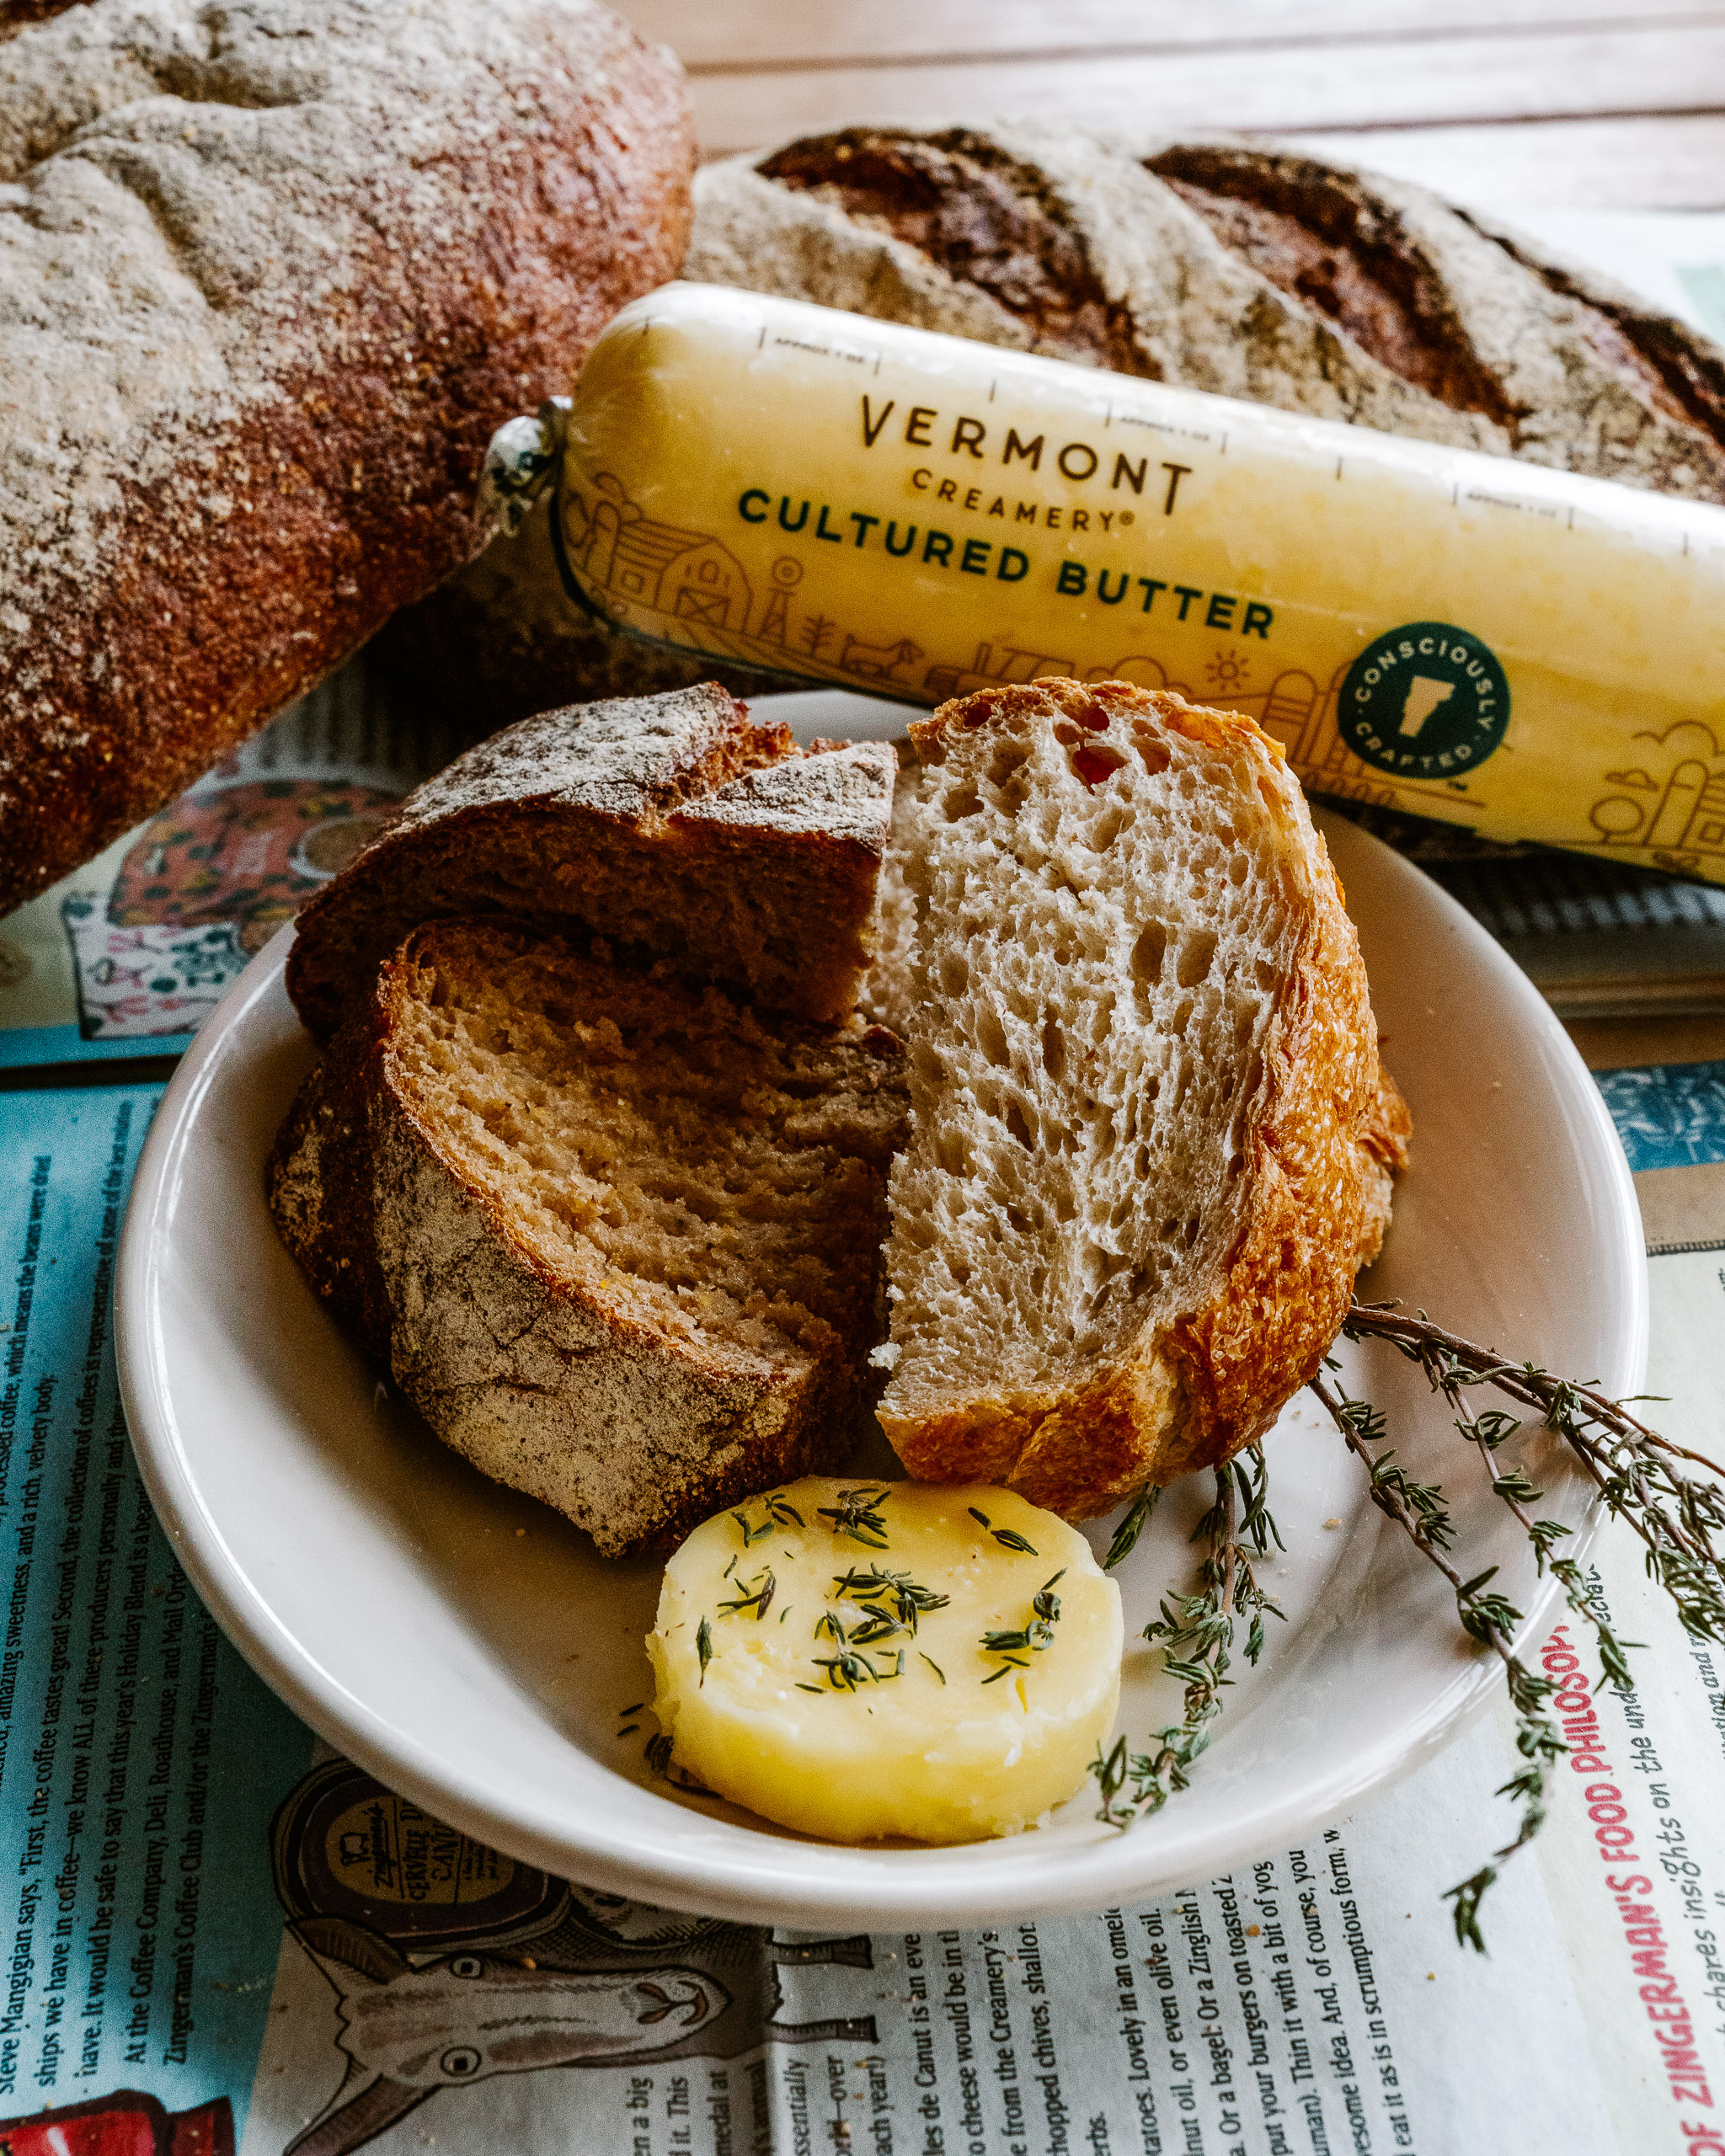 Vermont Creamery butter with bread